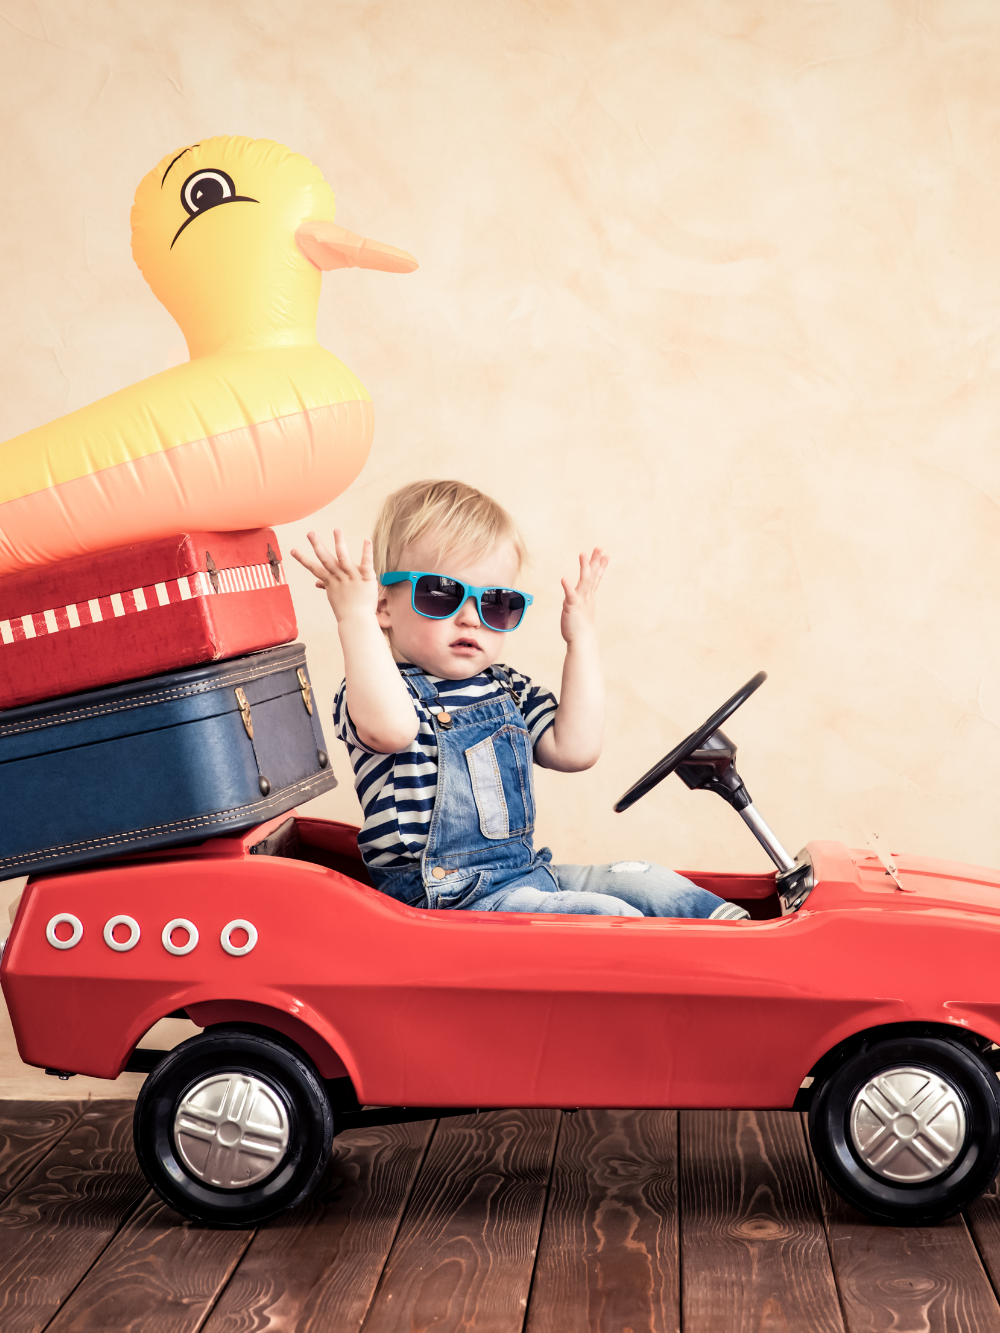 Toddler in a toy car with suitcases